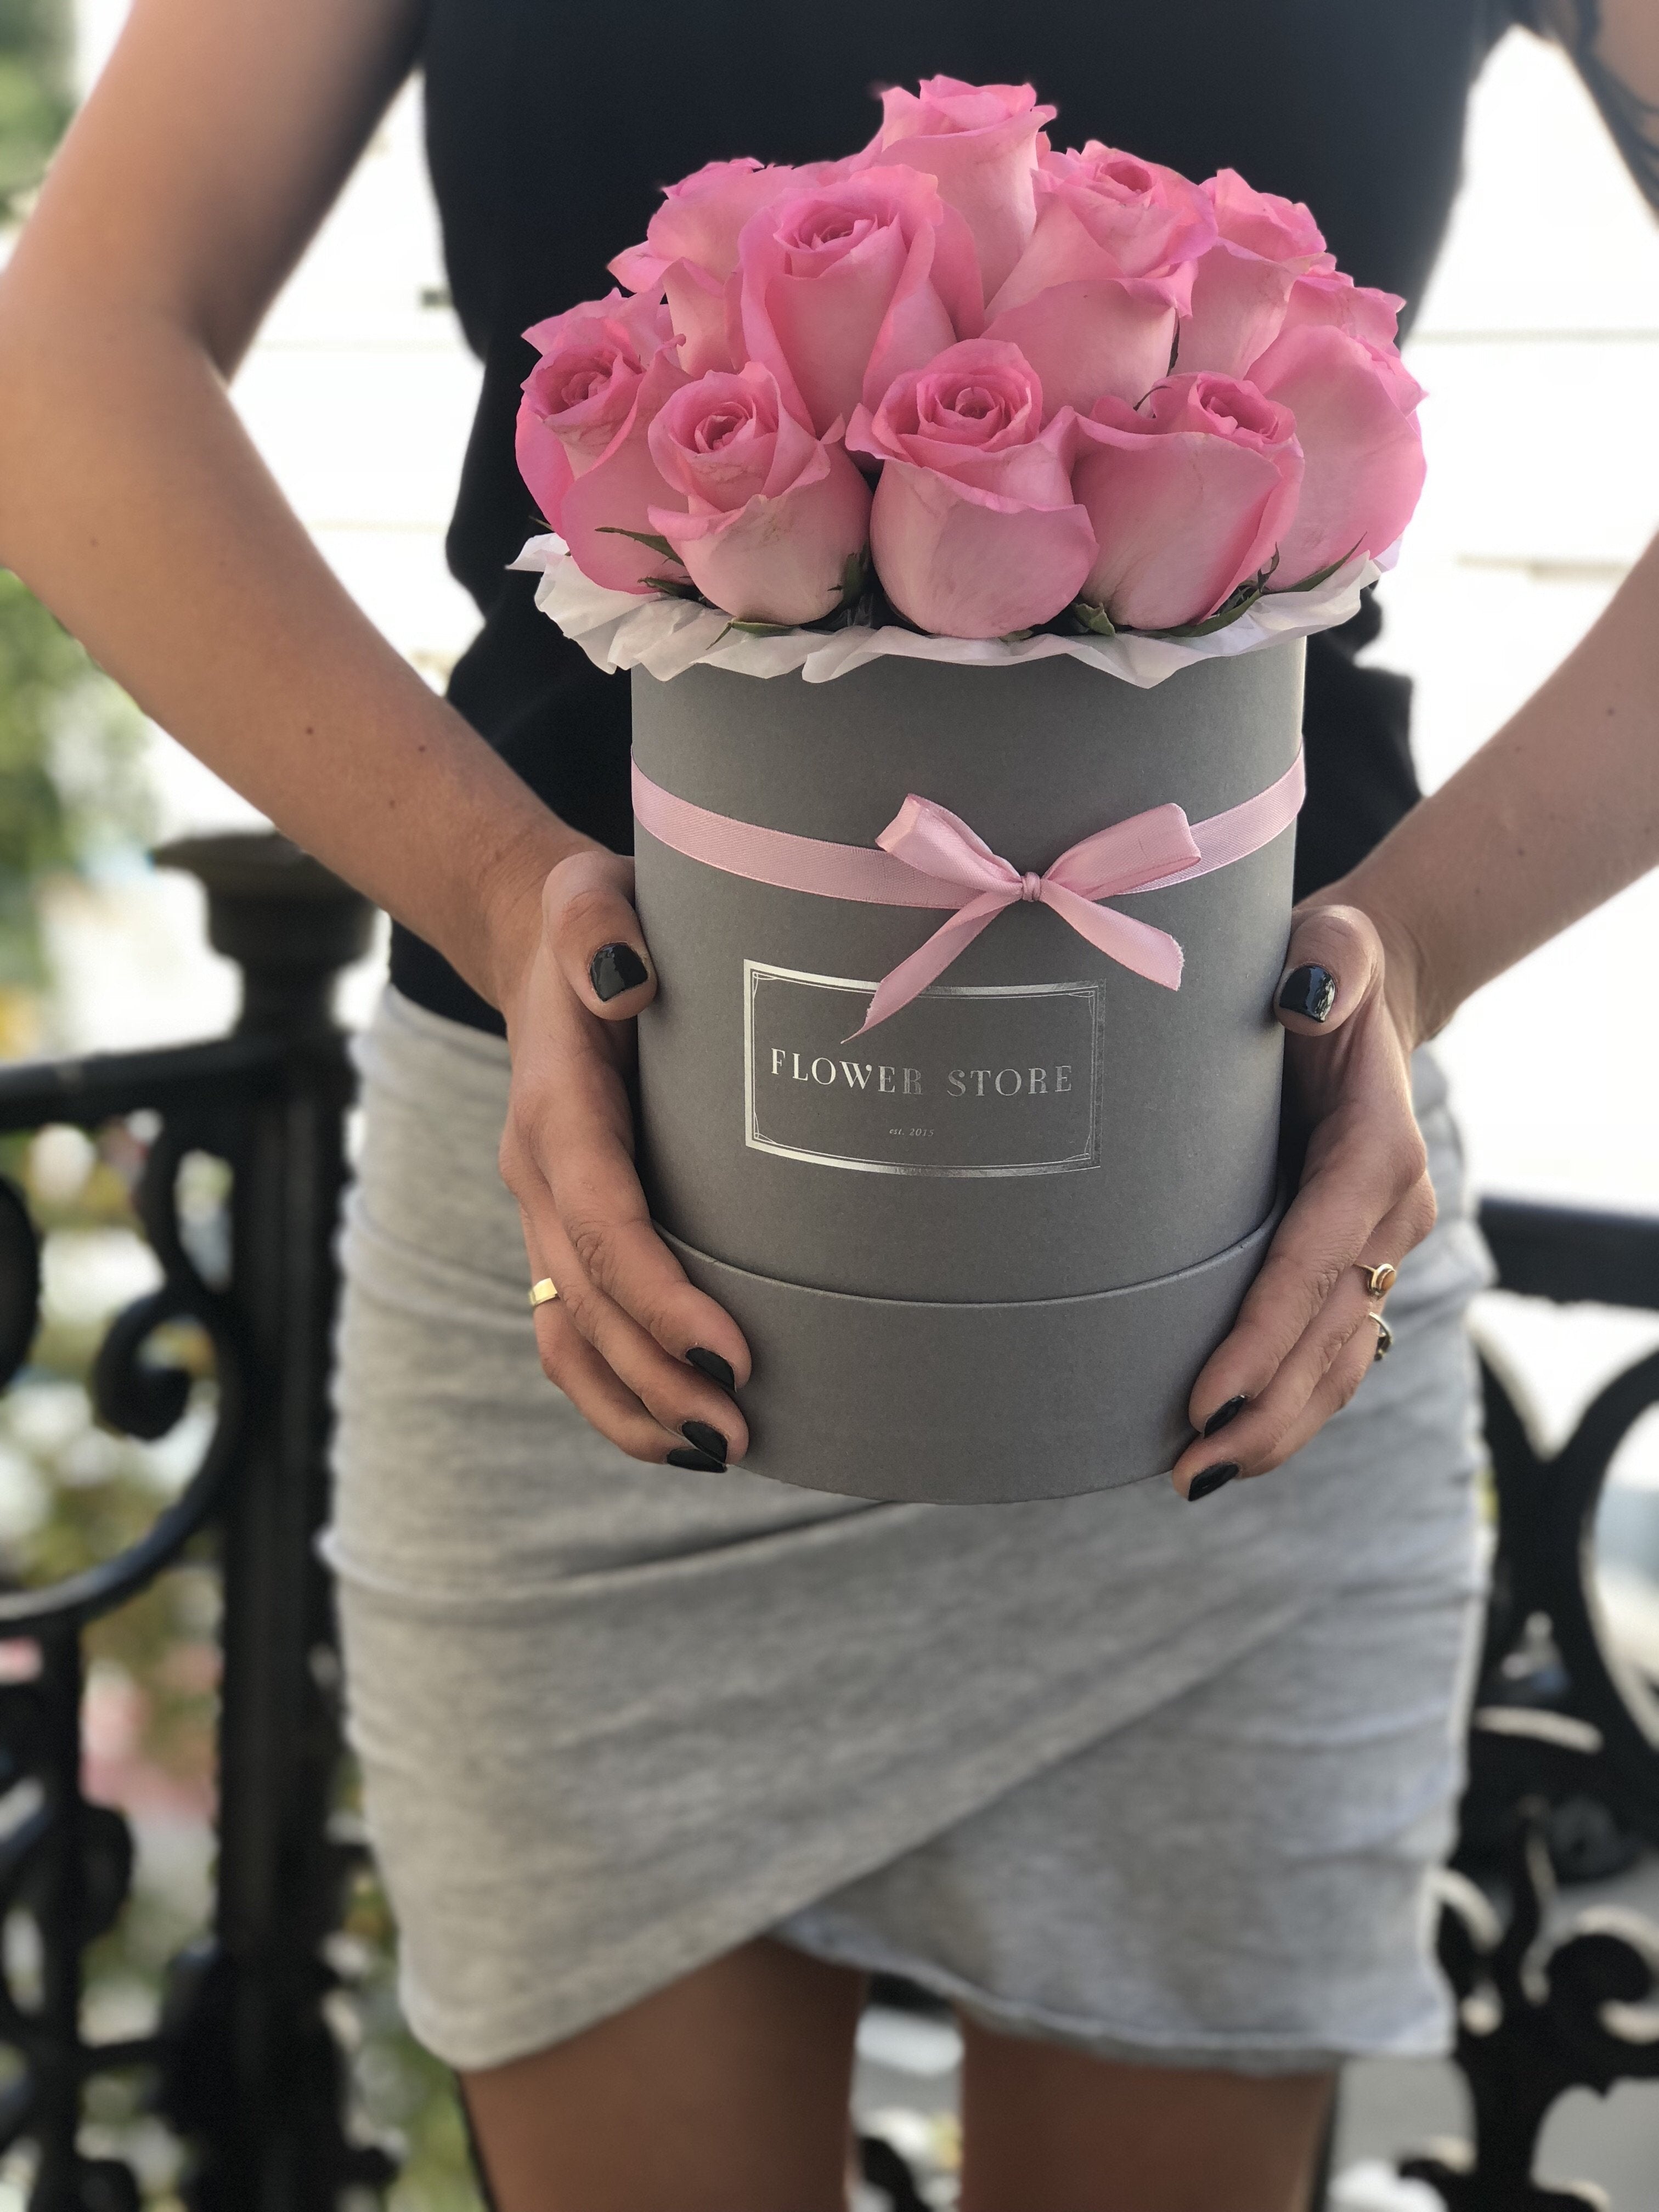 Medium round box with pink roses - live flowers